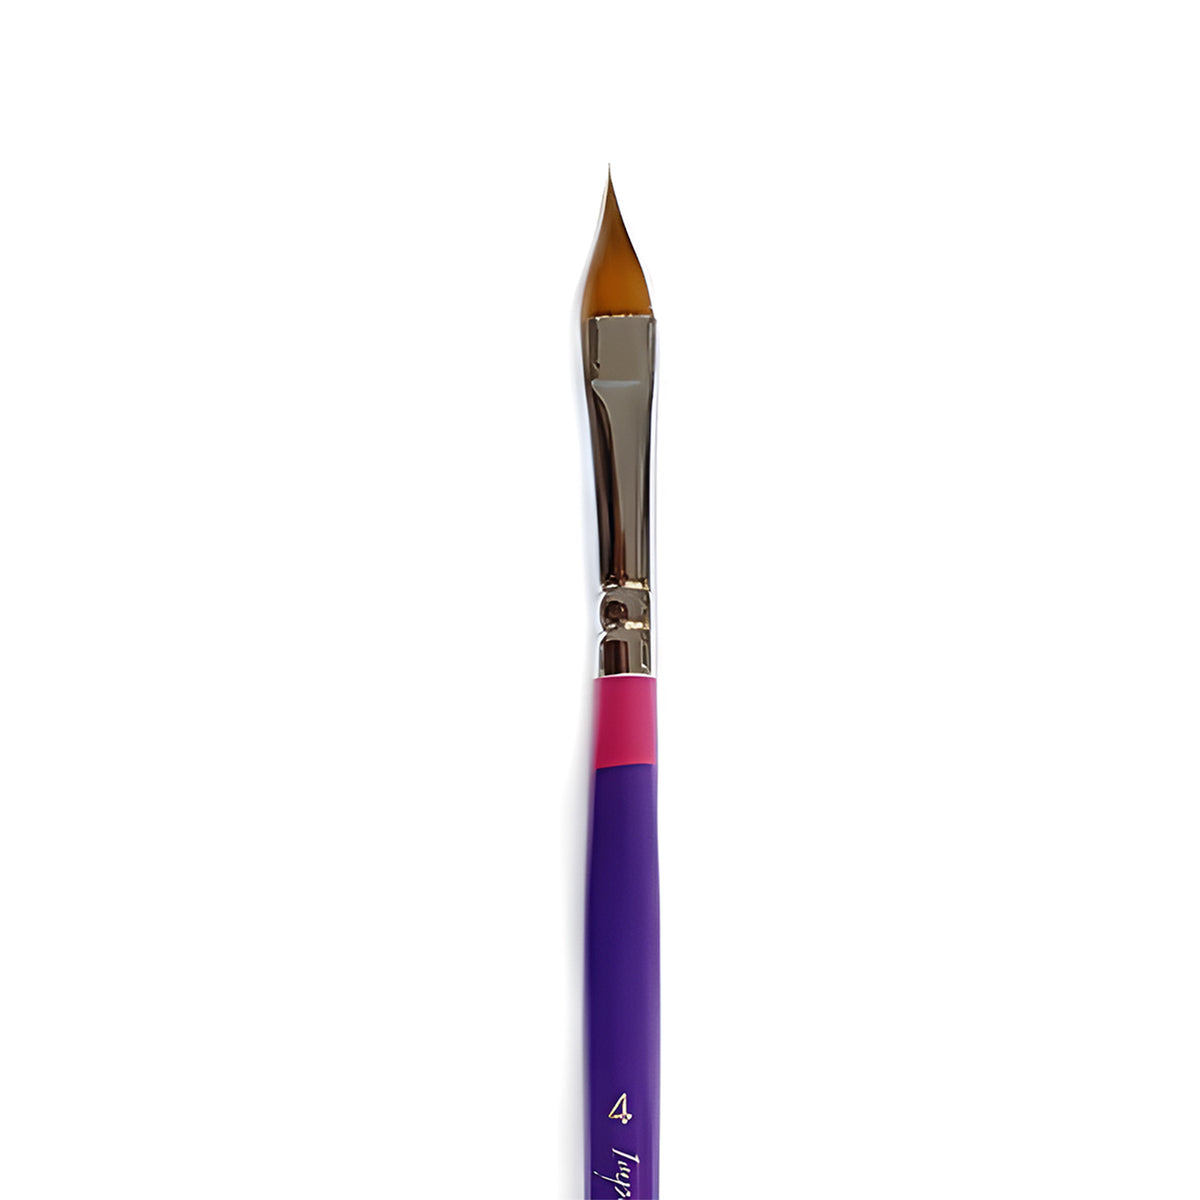 Impact Face Painting Brush - Bloom 810 #4